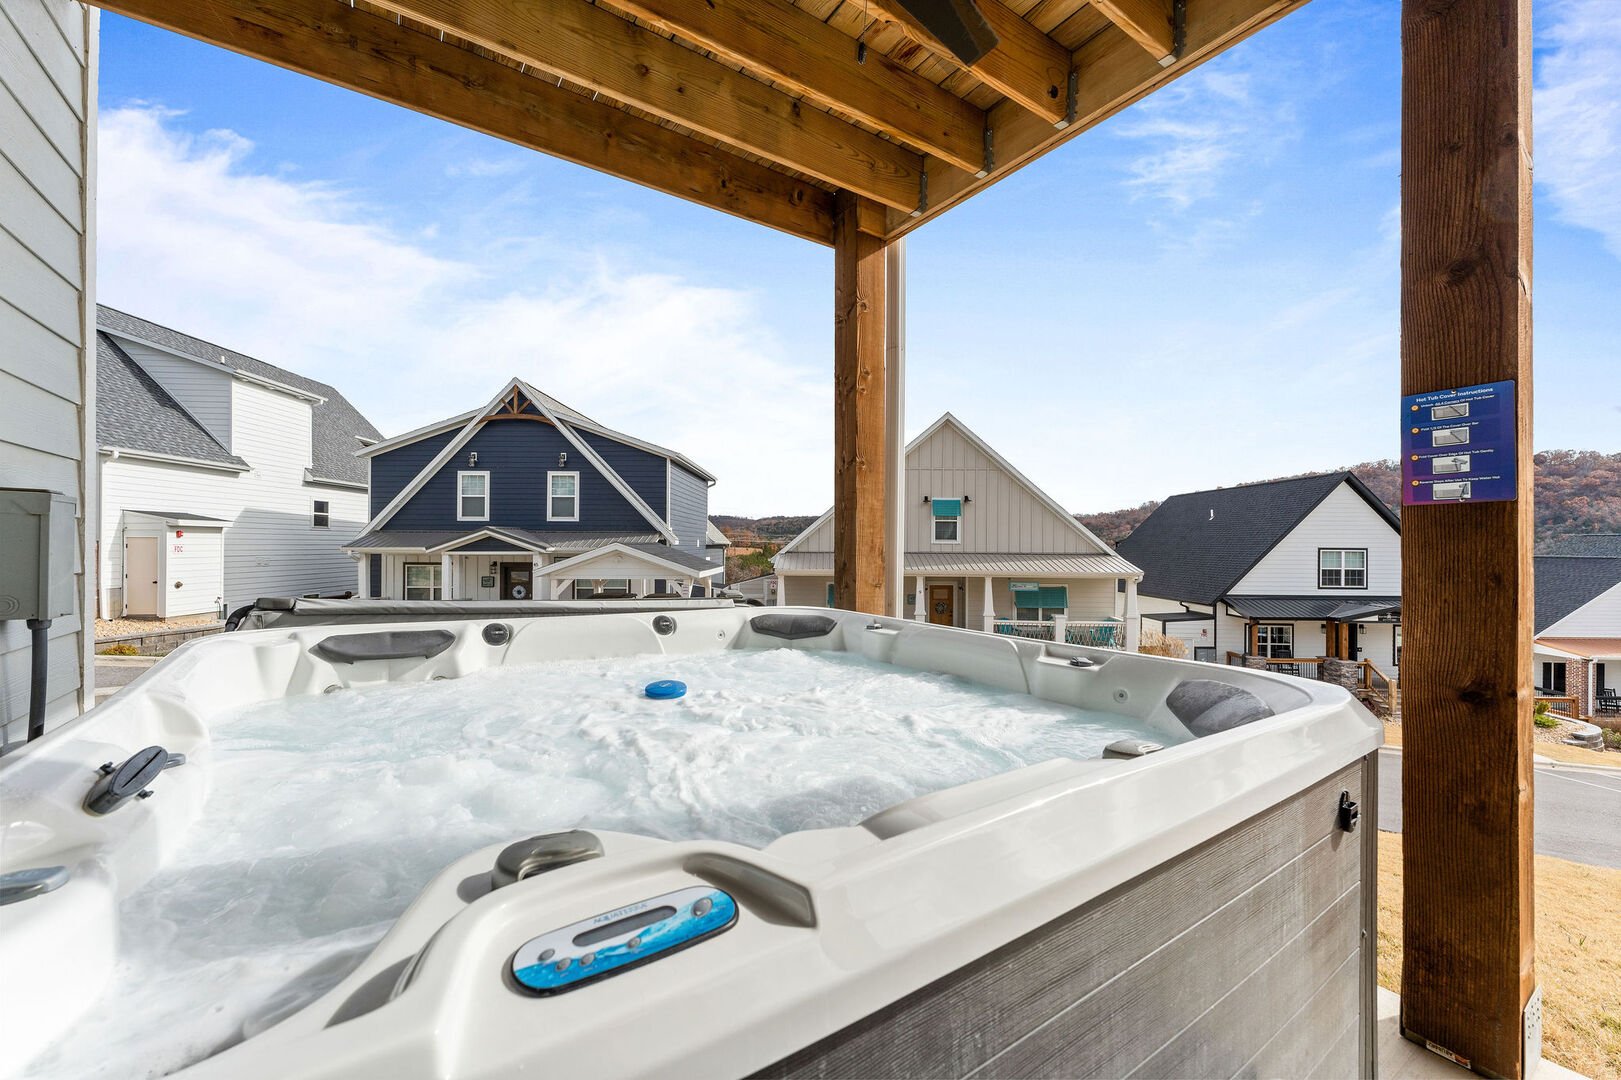 Lazy Daze: 6BR/7BA Lakefront Leisure Living with Luxe Hot Tub